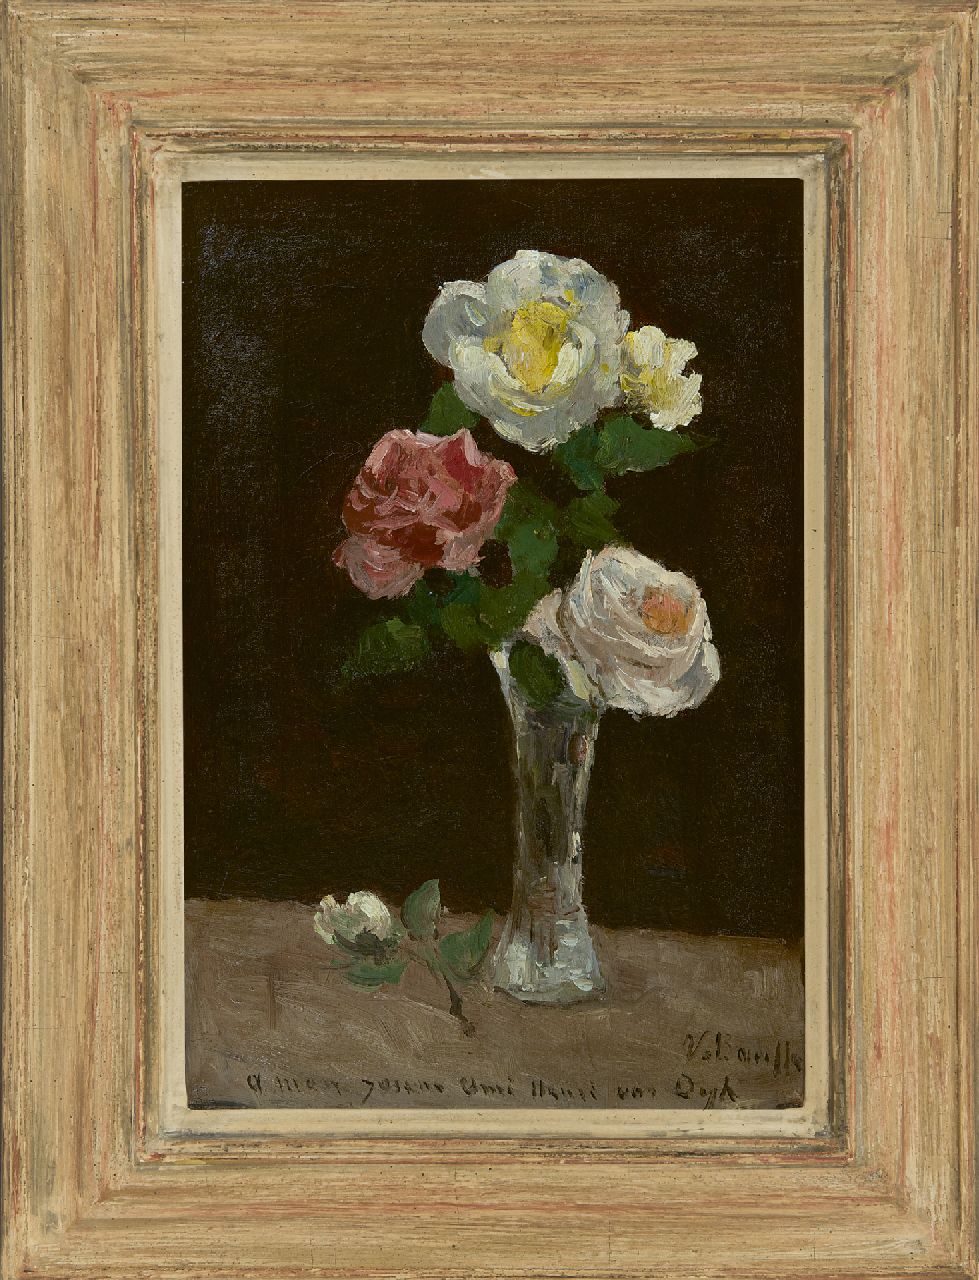 Bauffe V.  | Victor Bauffe | Paintings offered for sale | Roses in a crystal vase, oil on canvas 37.0 x 25.7 cm, signed l.r.